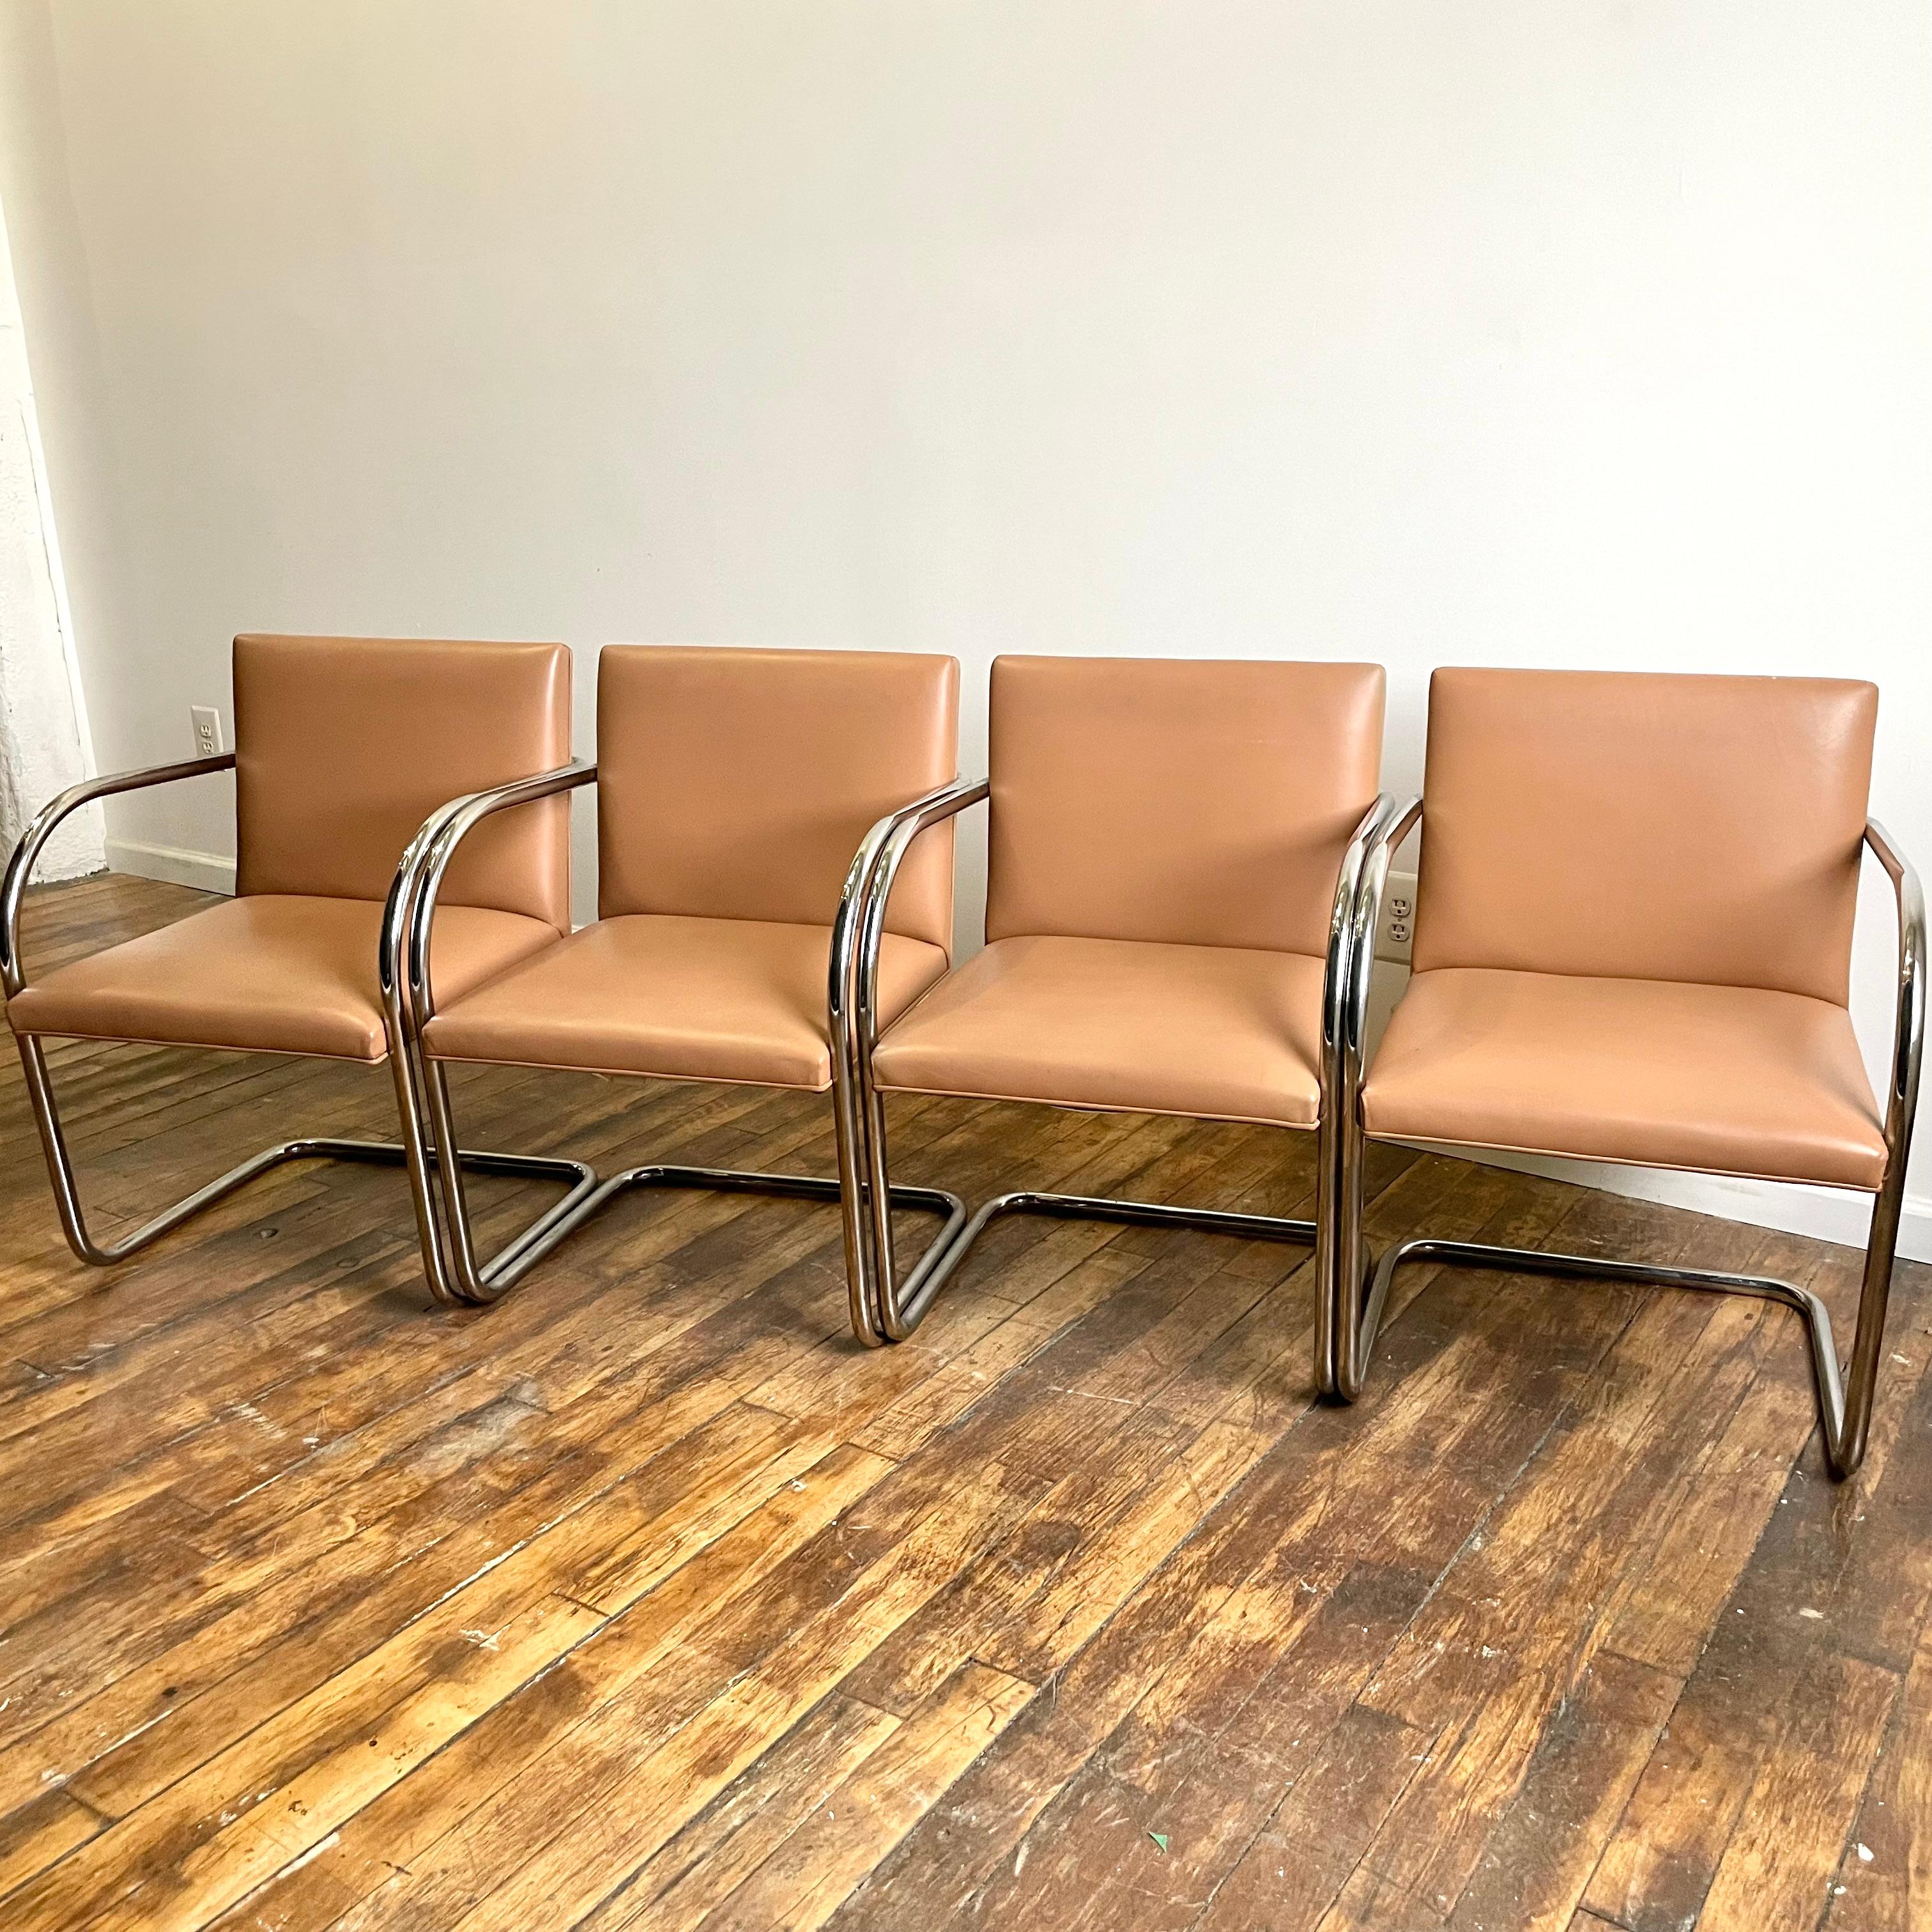 American Set of 8 - Knoll BRNO Leather Chairs